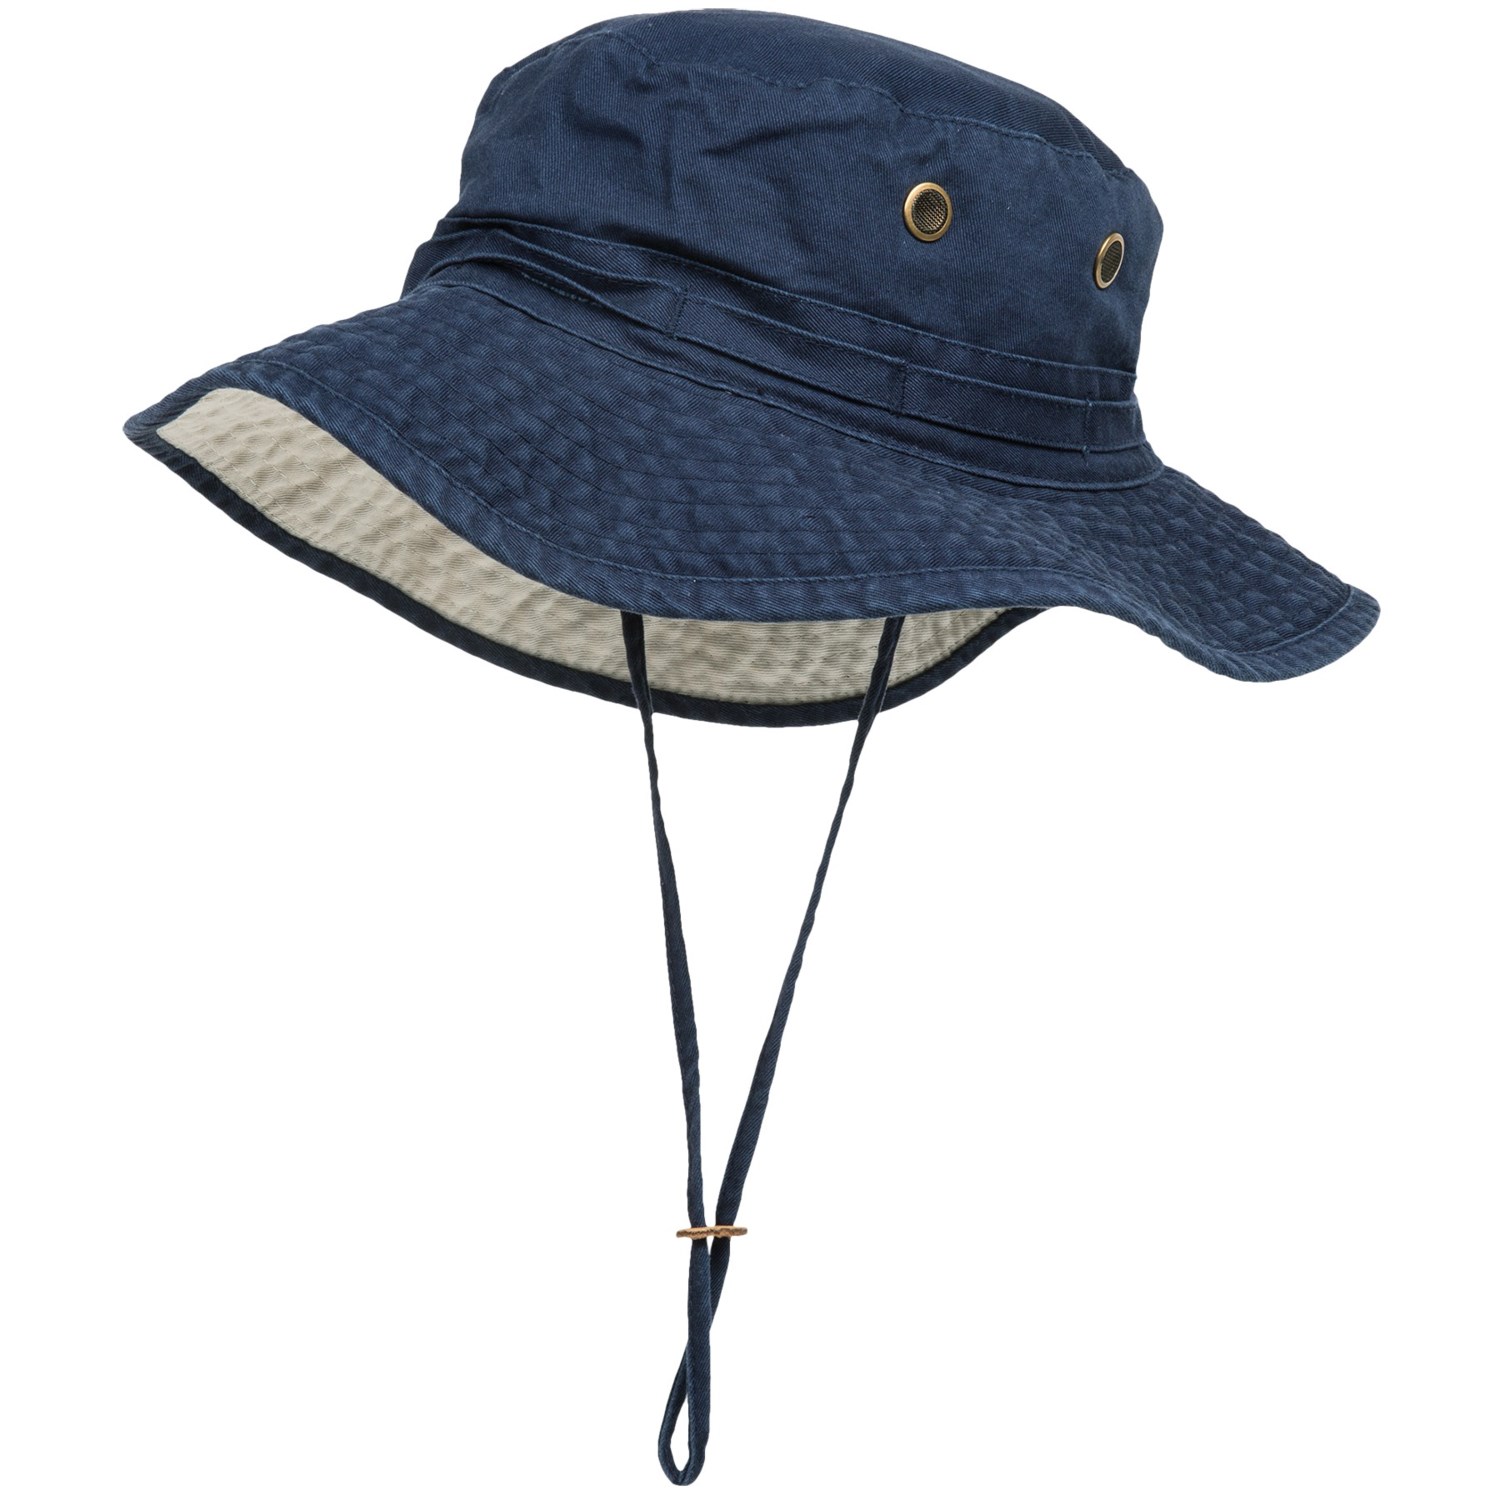 Dorfman Pacific Headwear Classic Boonie Hat - UPF 50+ (For Men and ...